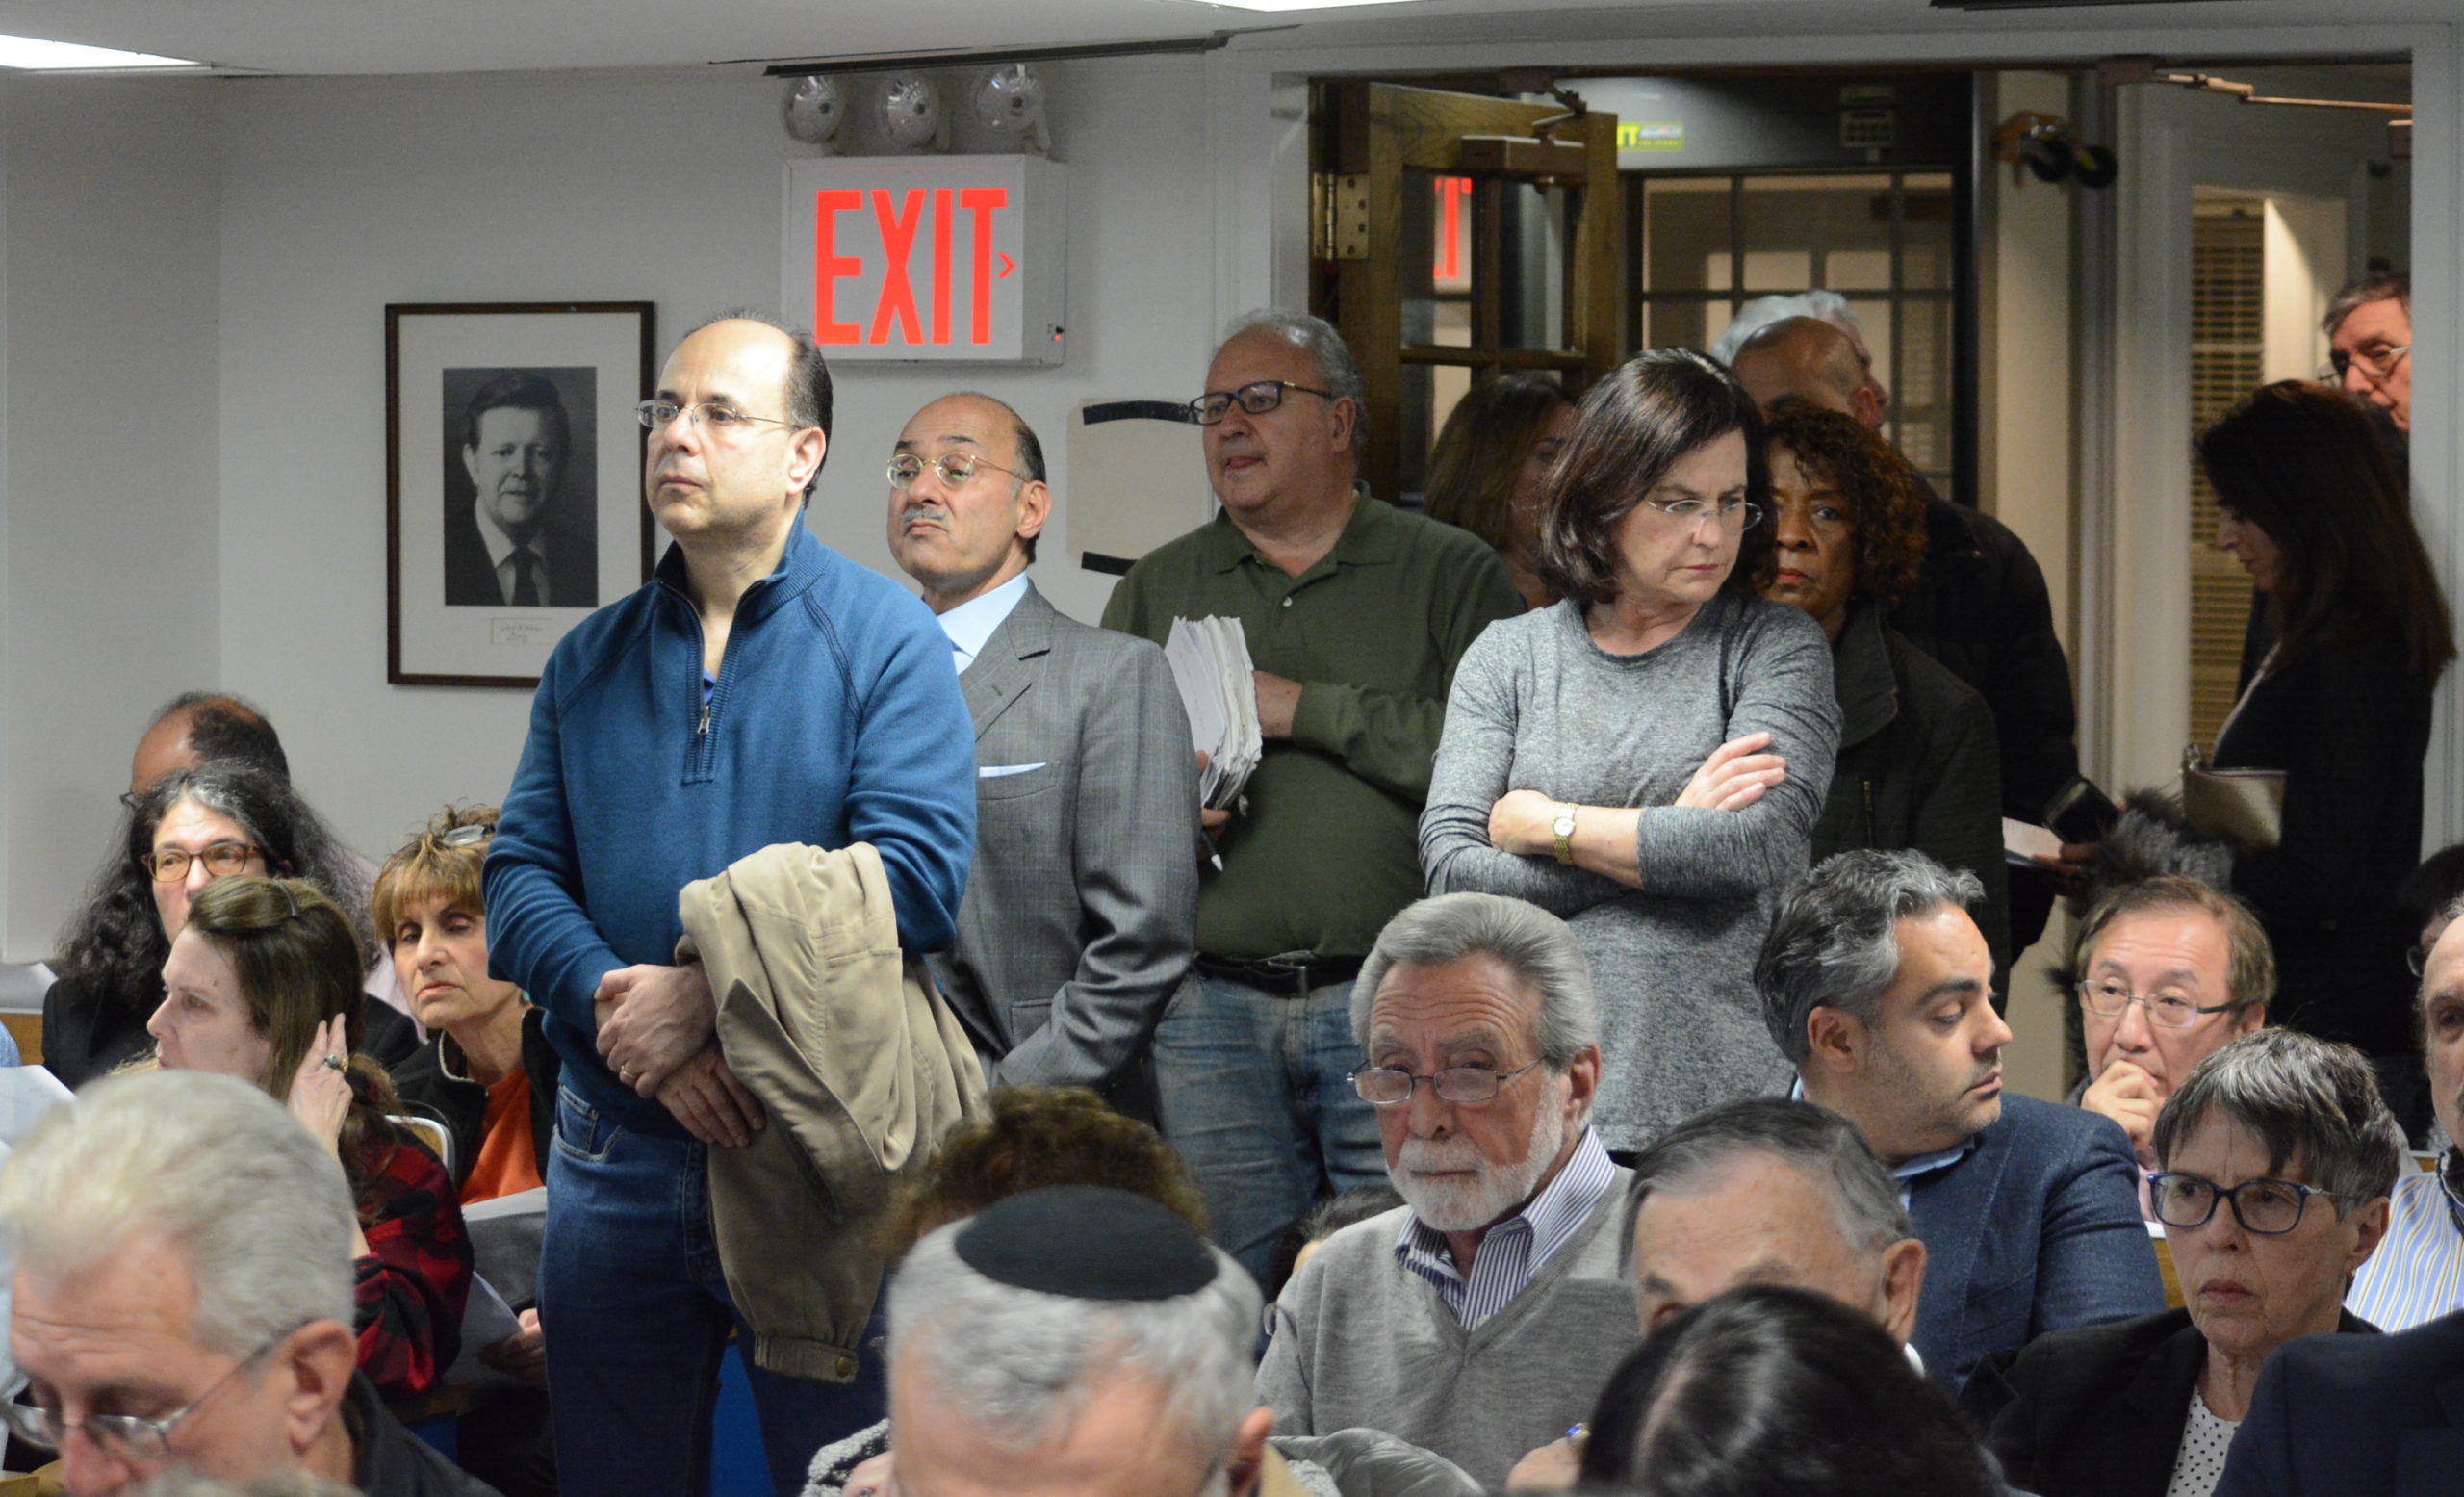 Great Neck Village Hall was overflowing on Tuesday night, as residents sought to hear VHB's presentation and offer feedback on their recommendations for Middle Neck Road and East Shore Road. (Photo by Janelle Clausen)